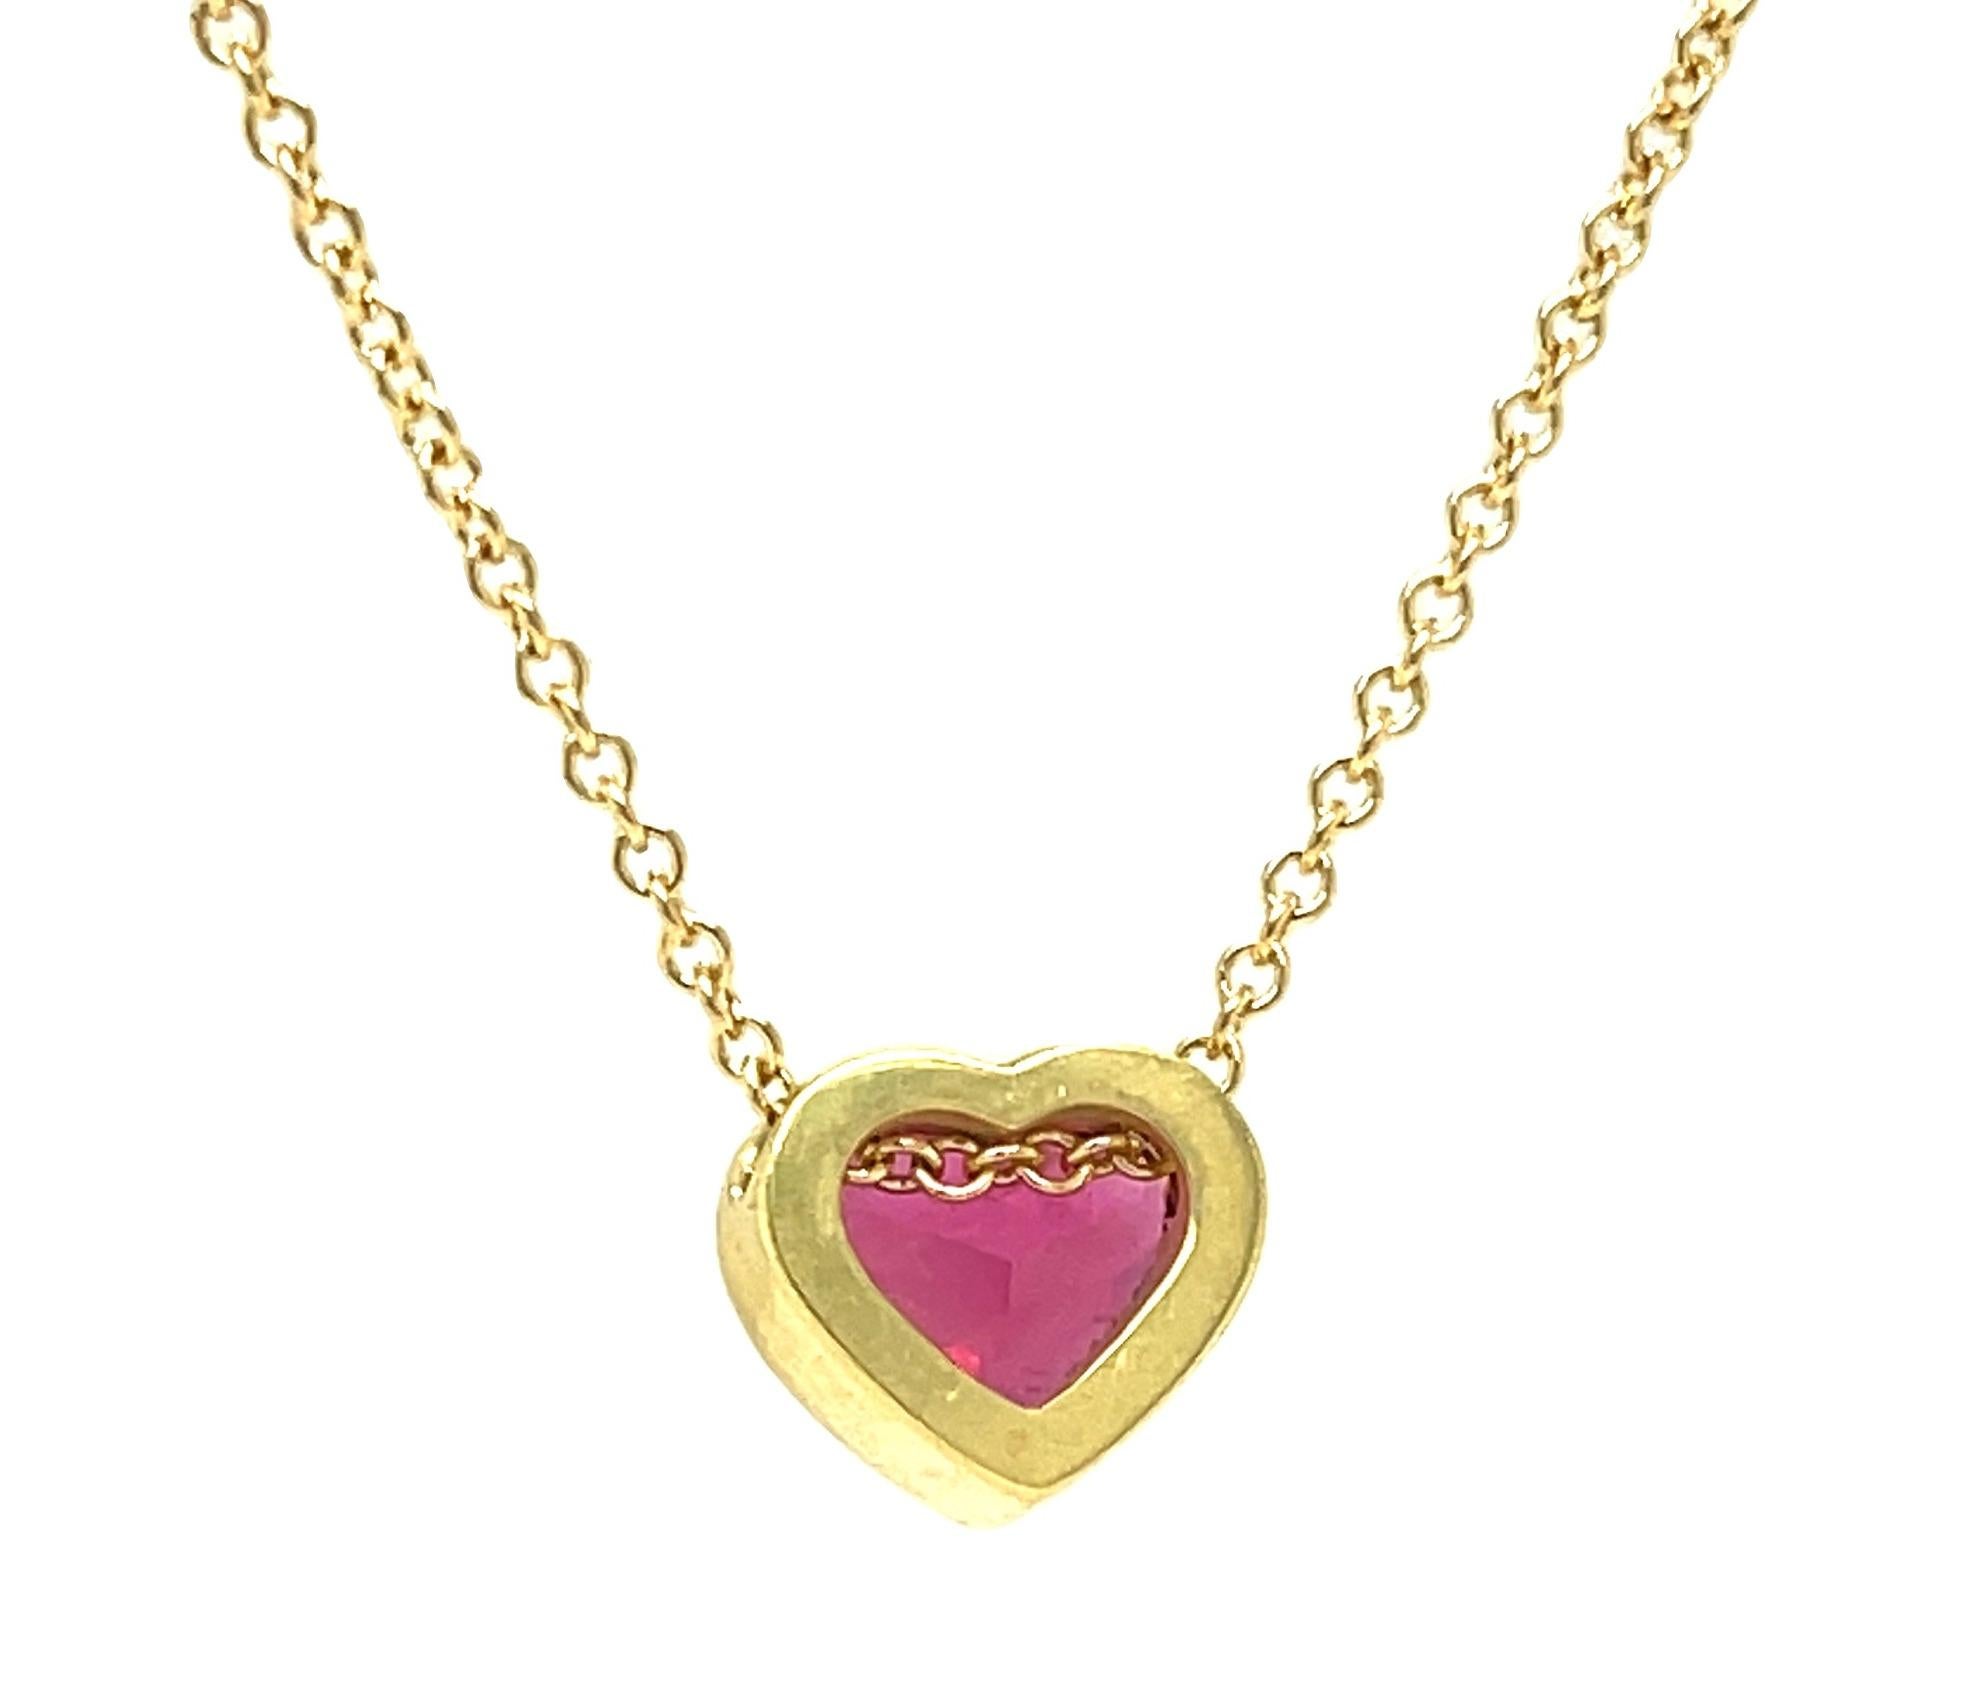 Women's 1.99 Carat Heart Shaped Pink Rubellite Tourmaline Necklace in 18k Yellow Gold For Sale